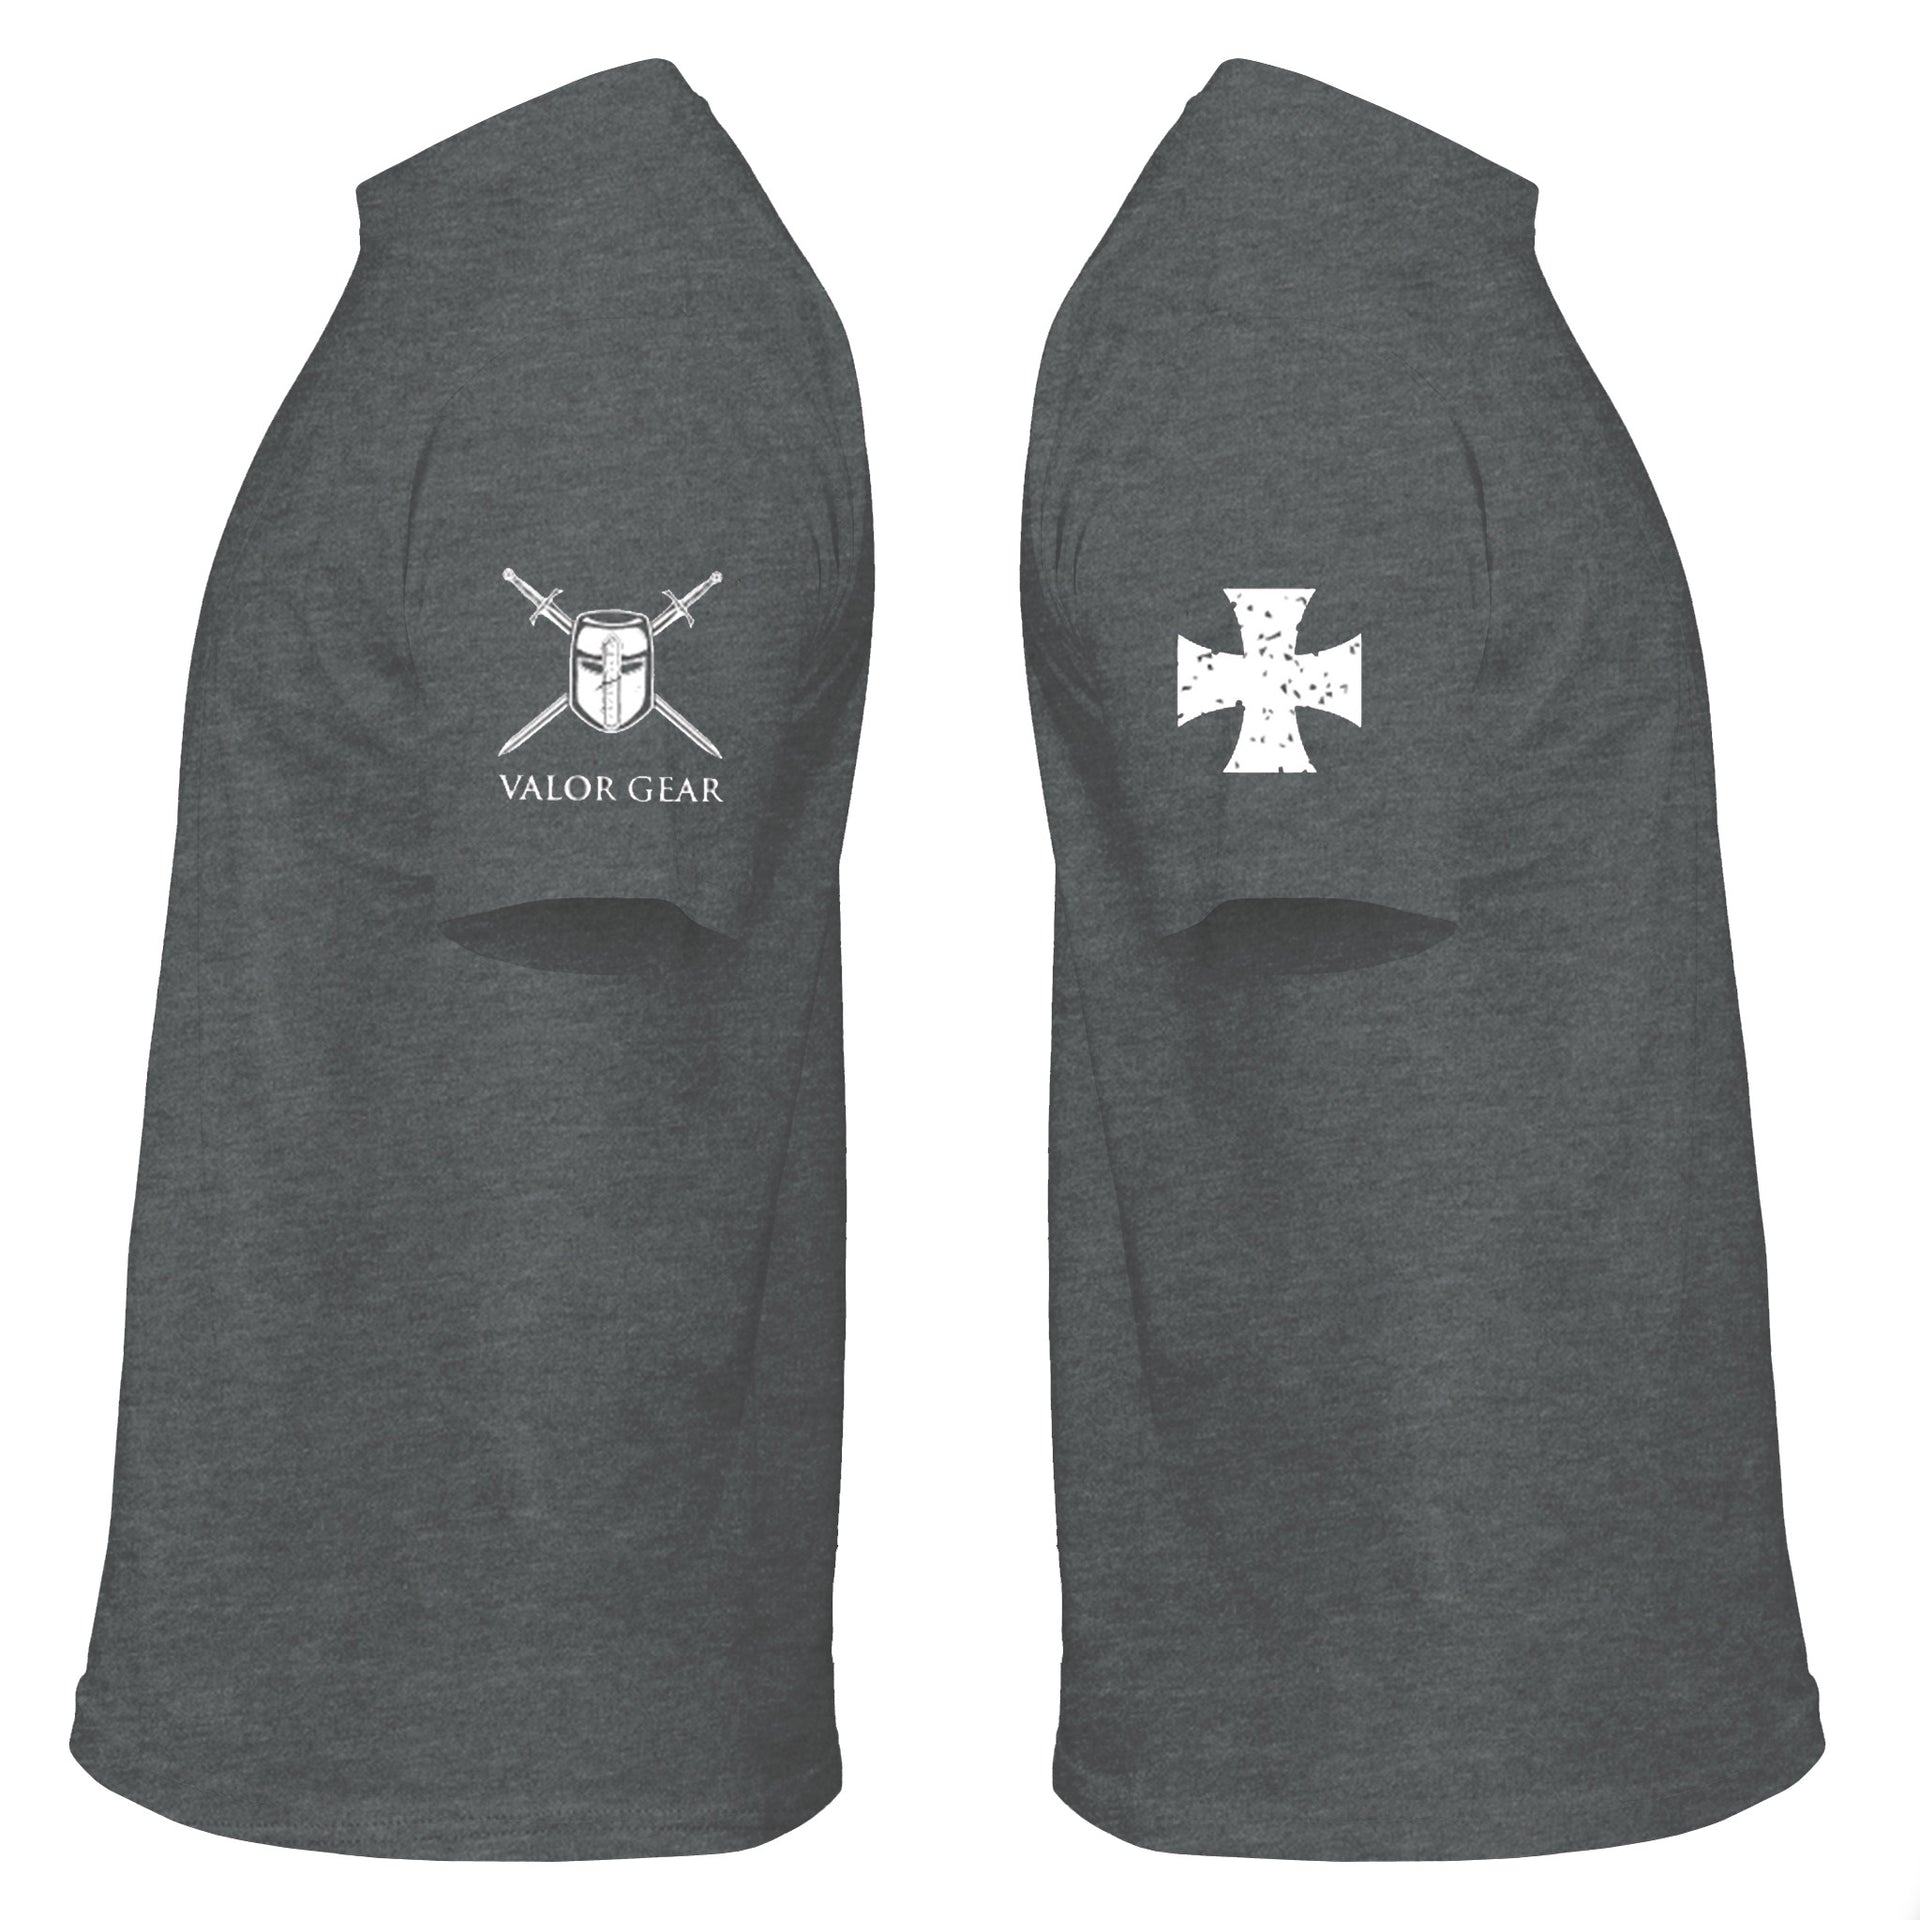 Sleeves are Valor Gear Logo and Iron Cross